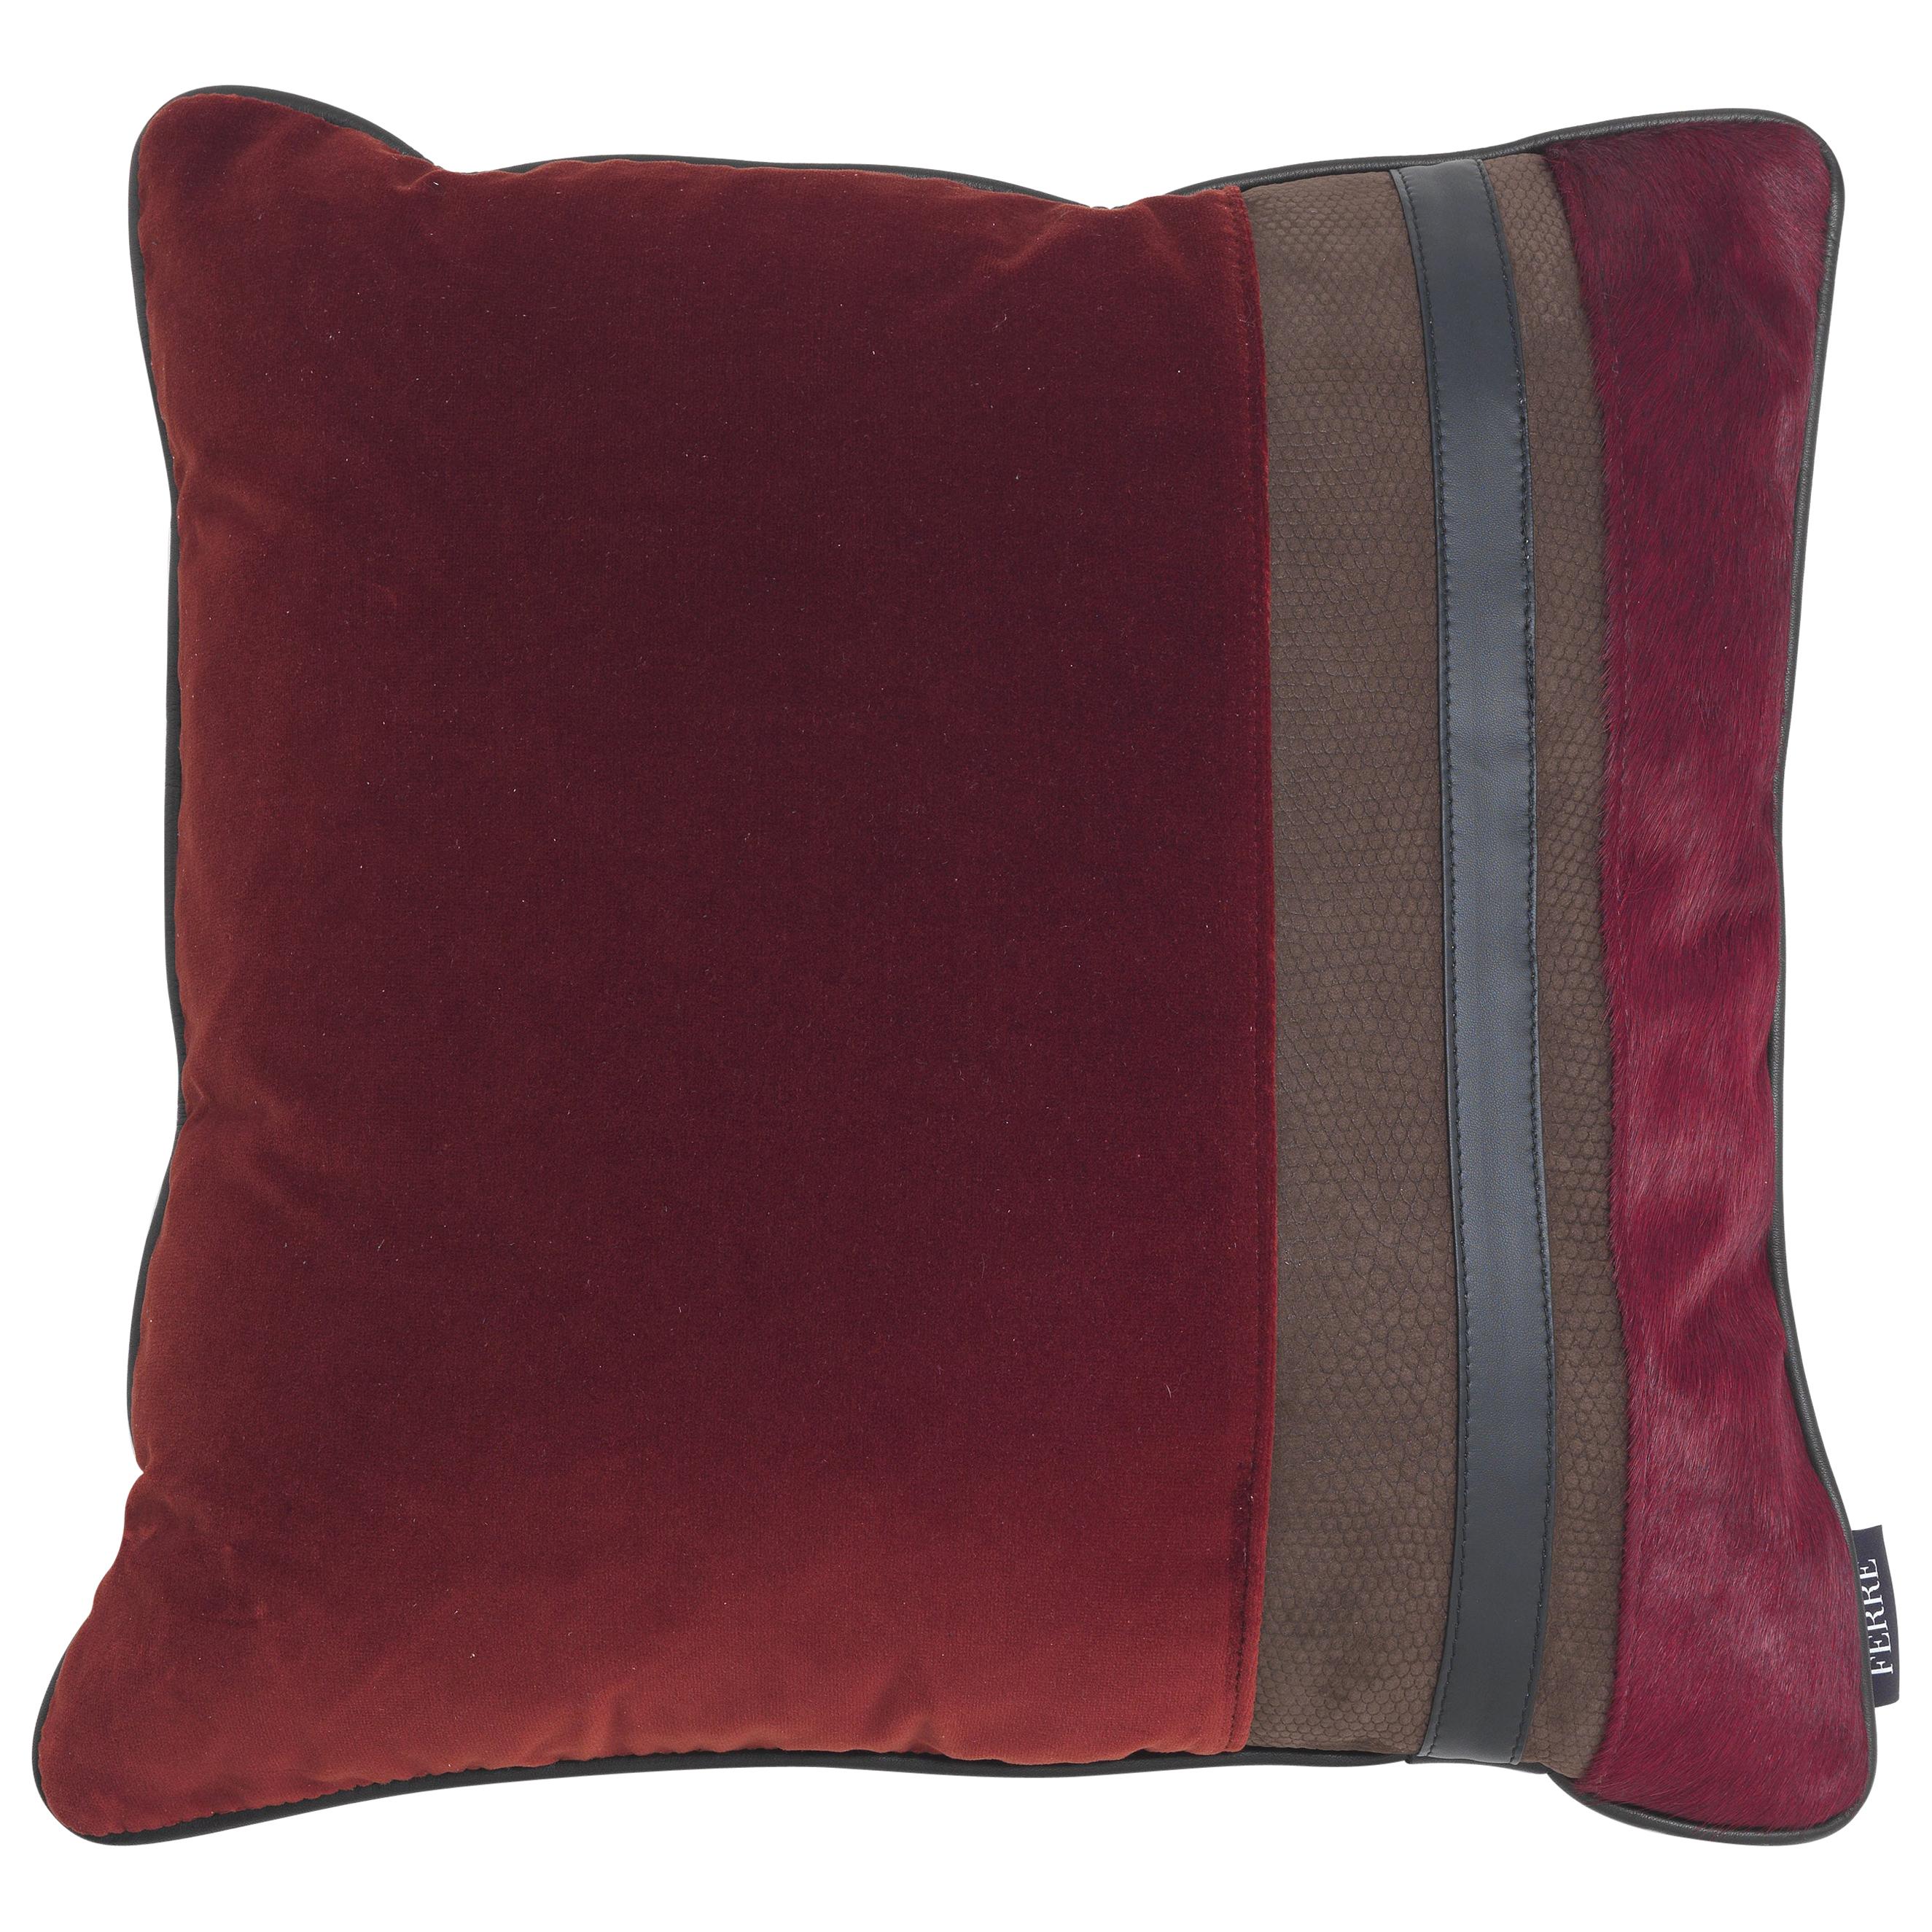 21st Century Road_1 Decorative Cushion in Velvet by Gianfranco Ferré Home